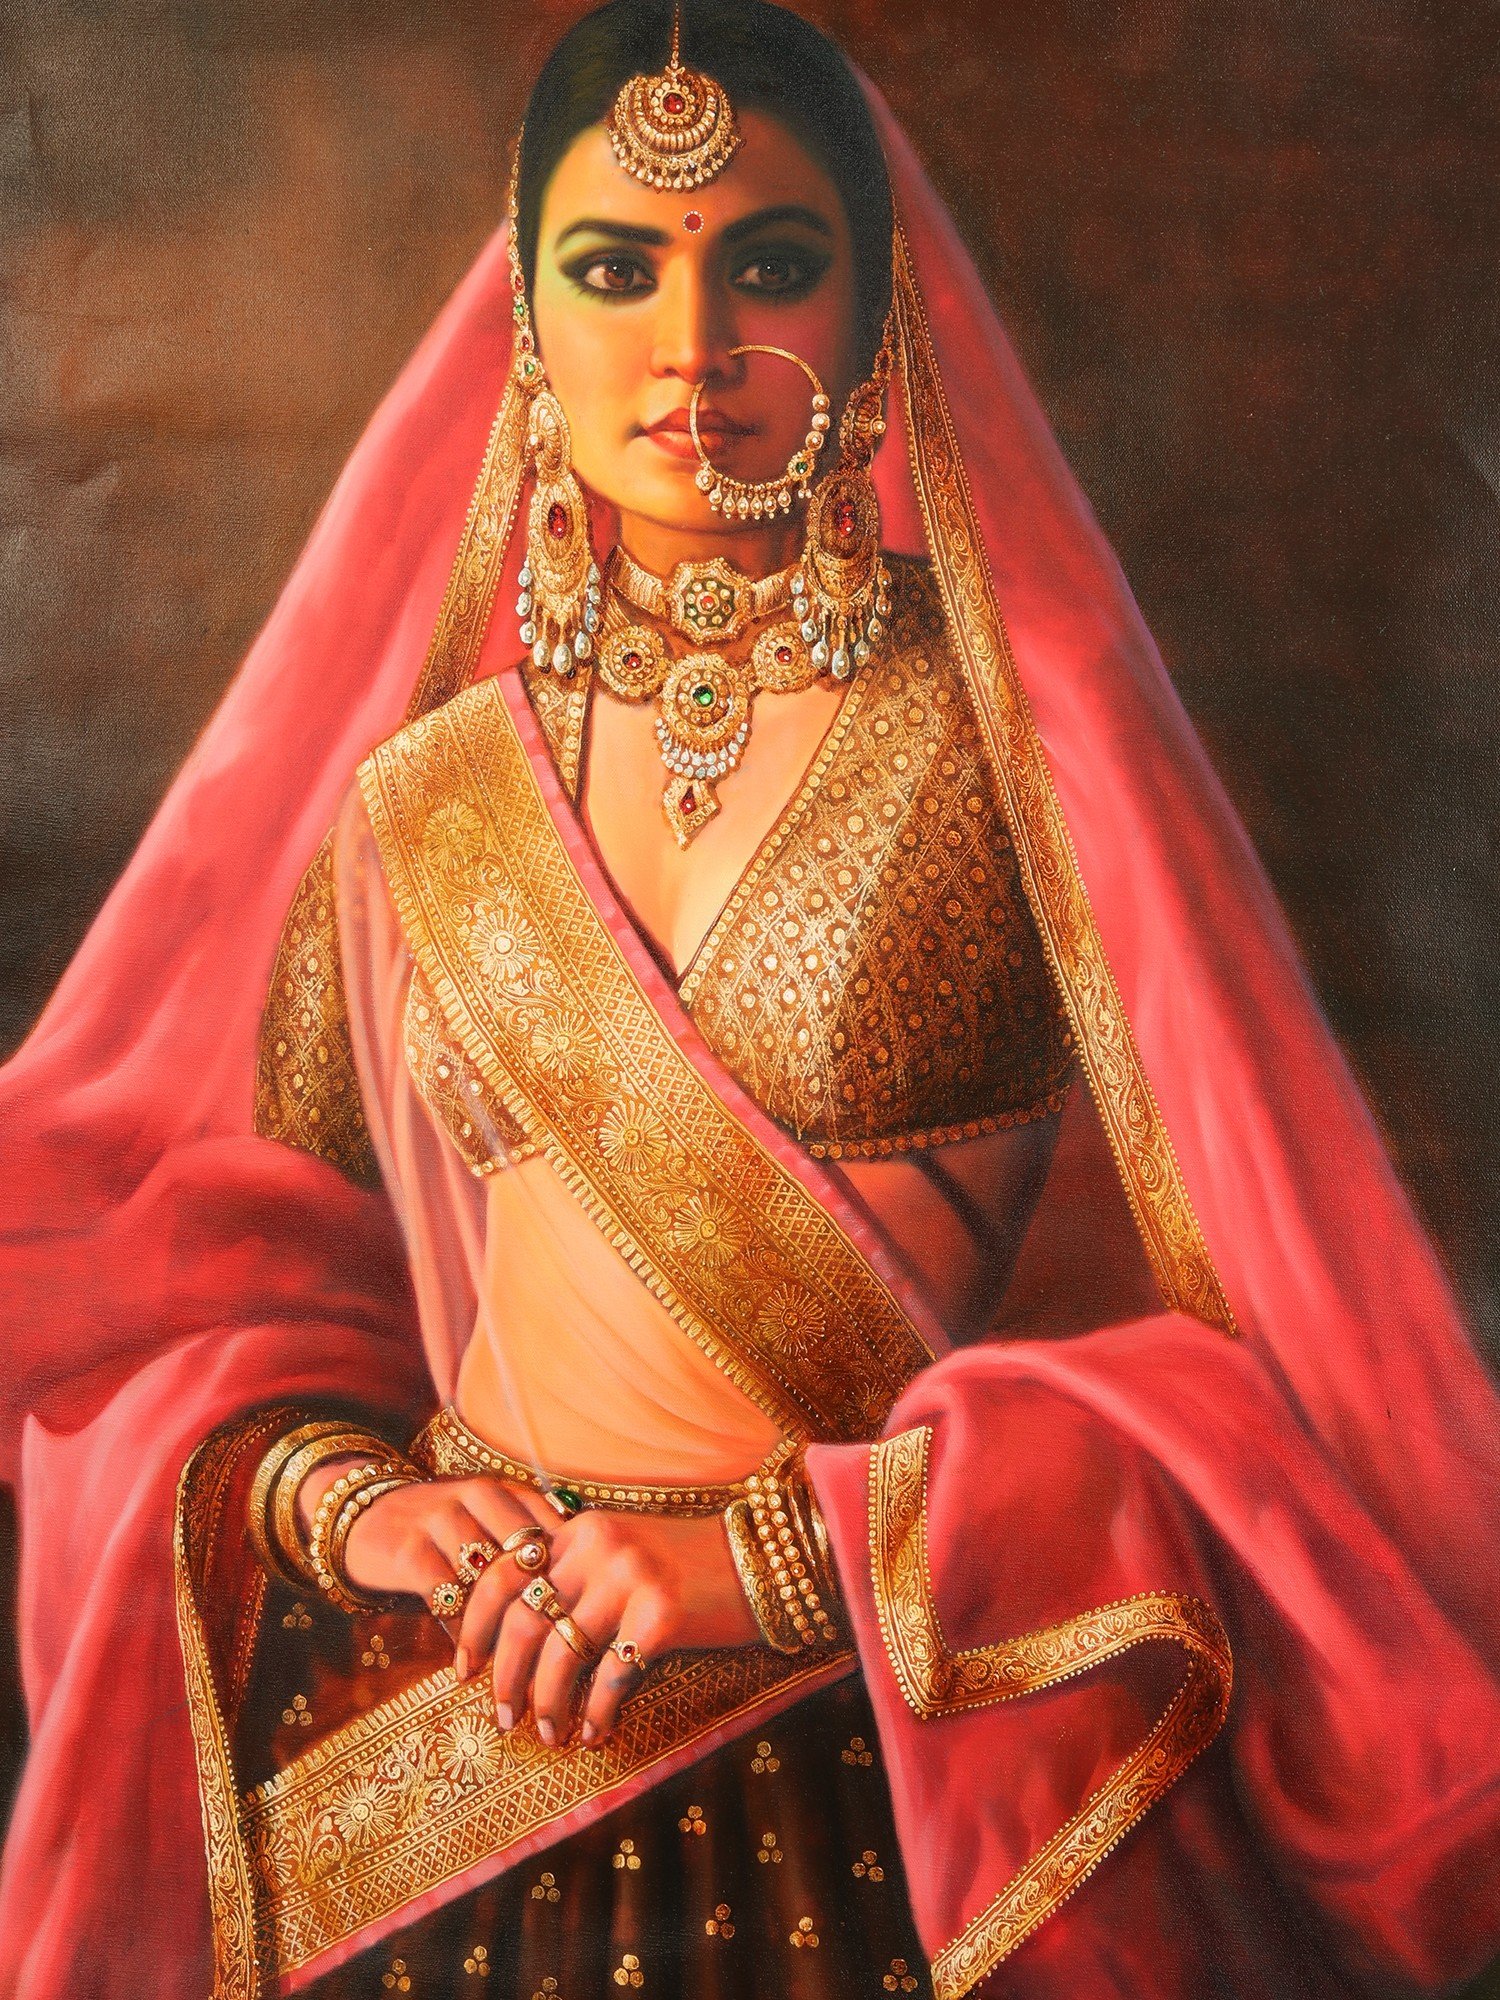 The Royal Highness Oil Painting on Canvas | Without Frame | Exotic ...